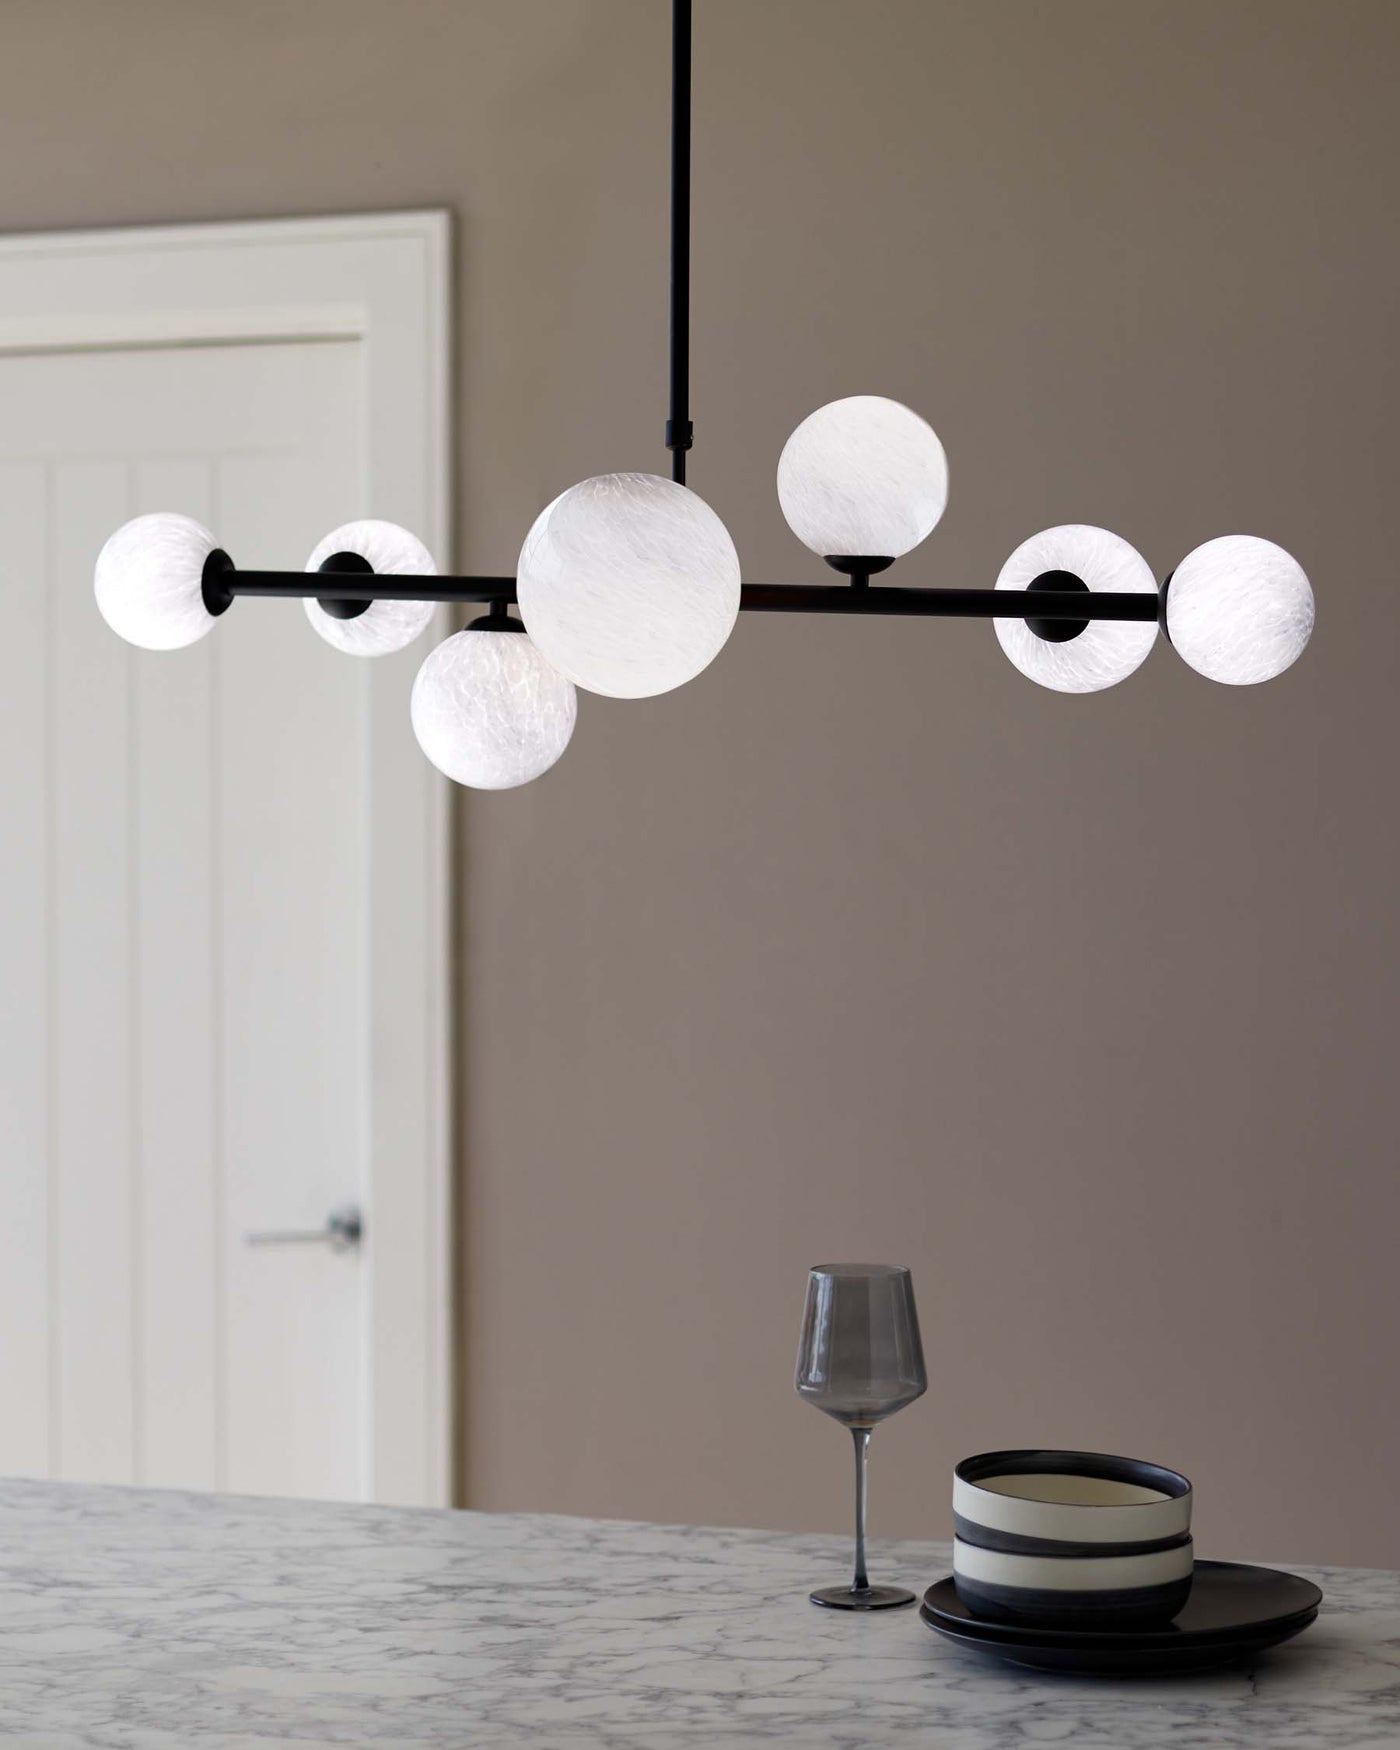 A minimalist marble tabletop with a set of two dark, contrasting-rimmed plates and a smoke grey wine glass displayed under an elegant, modern chandelier featuring a linear black fixture with evenly spaced opaque white globes.